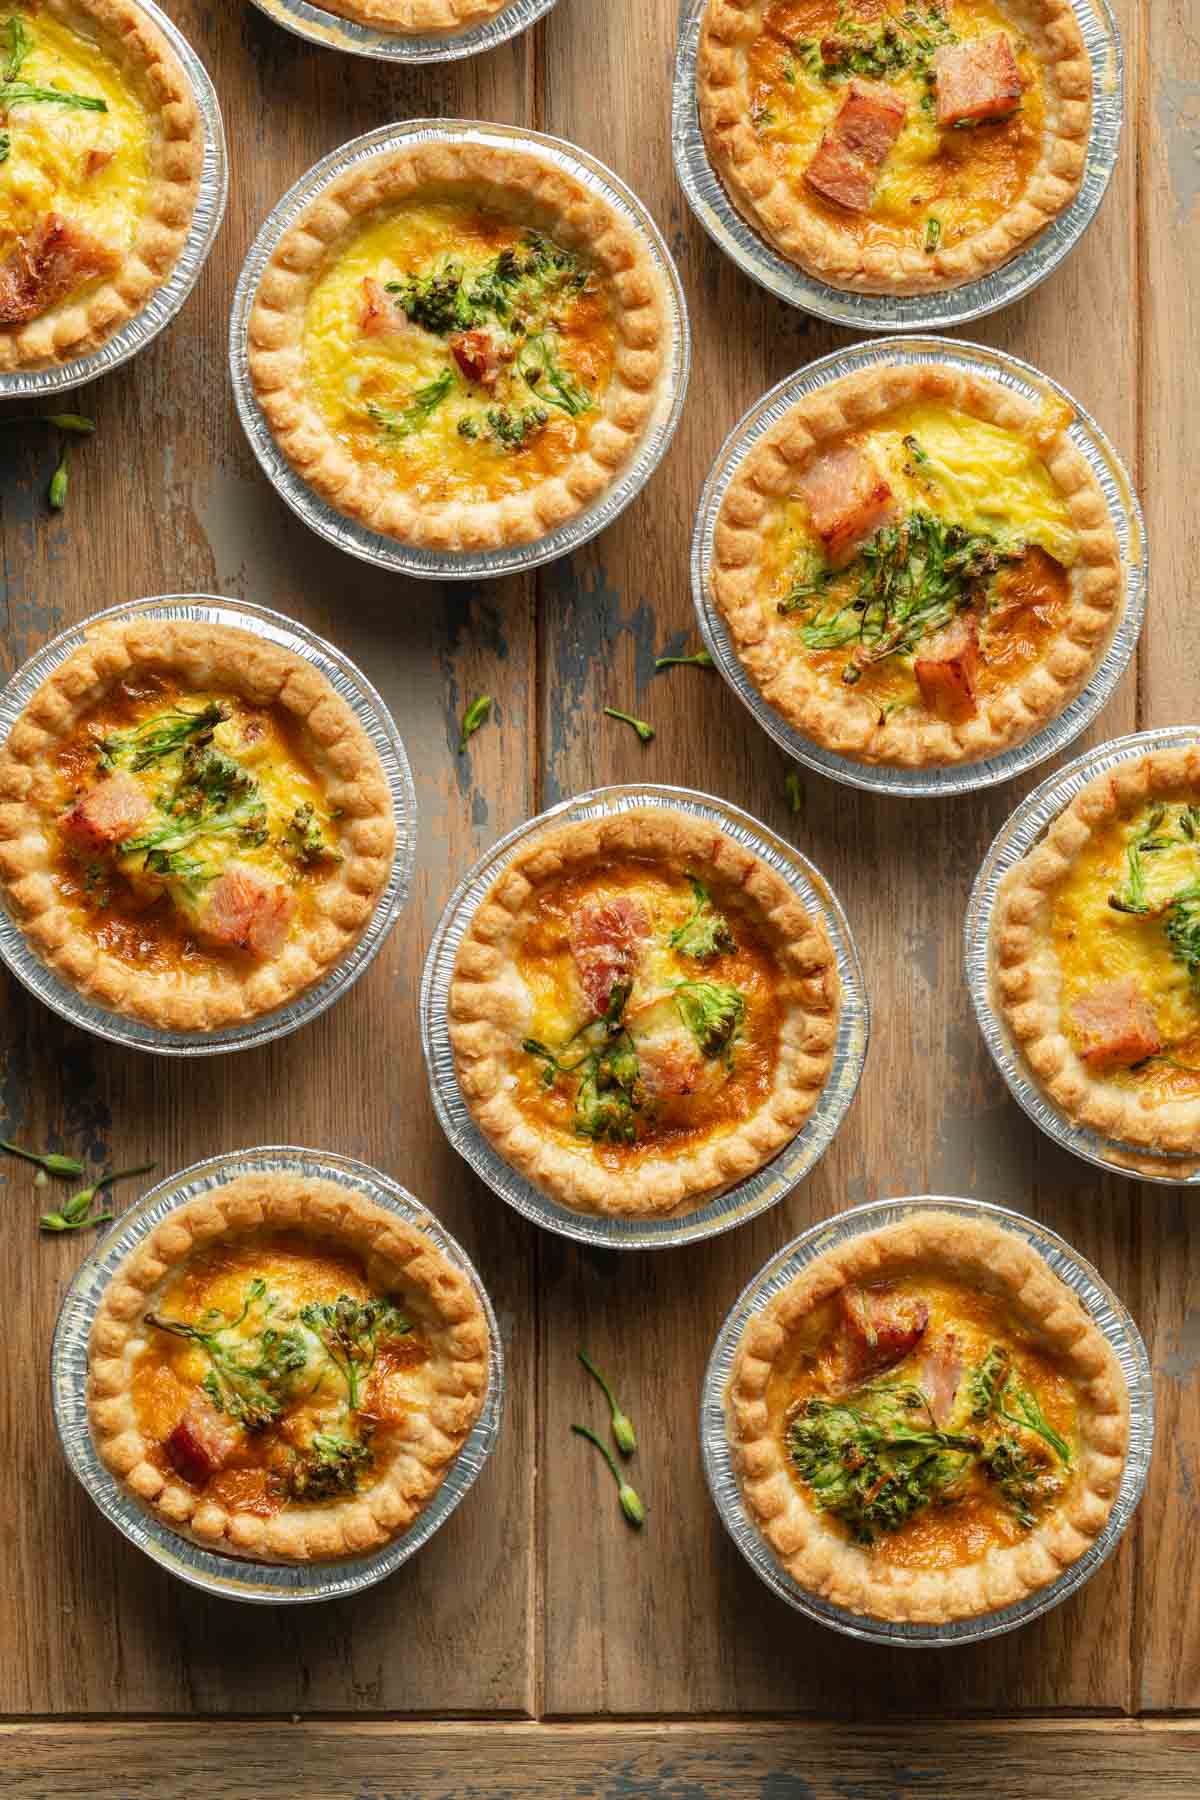 Mini quiches in foil tart shells arranged on a wooden surface.